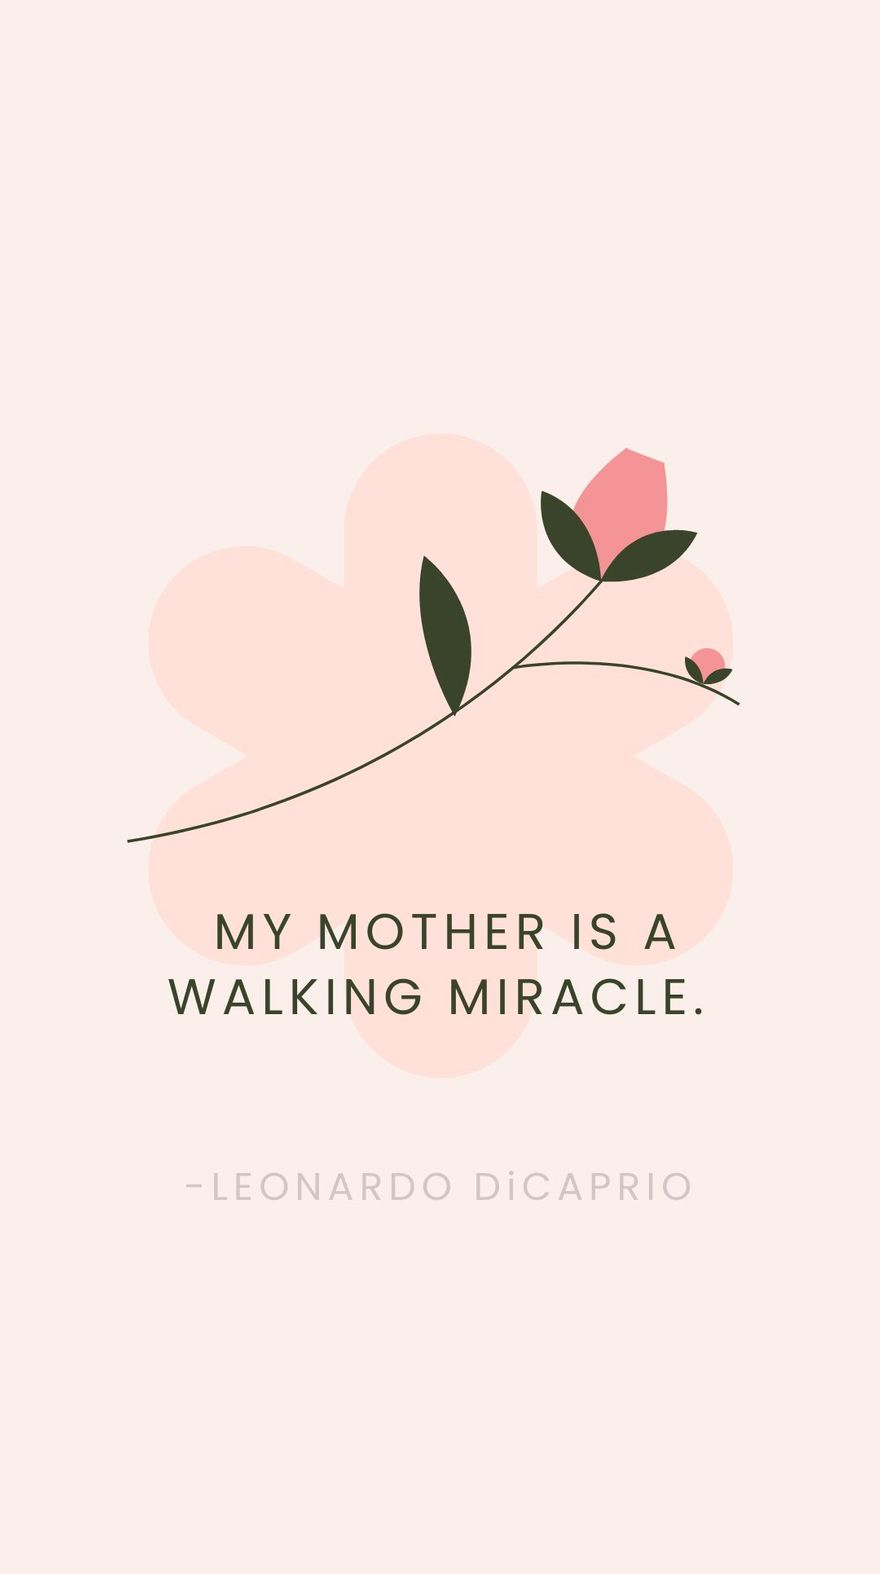 Free Leonardo DiCaprio - My mother is a walking miracle.  in JPG